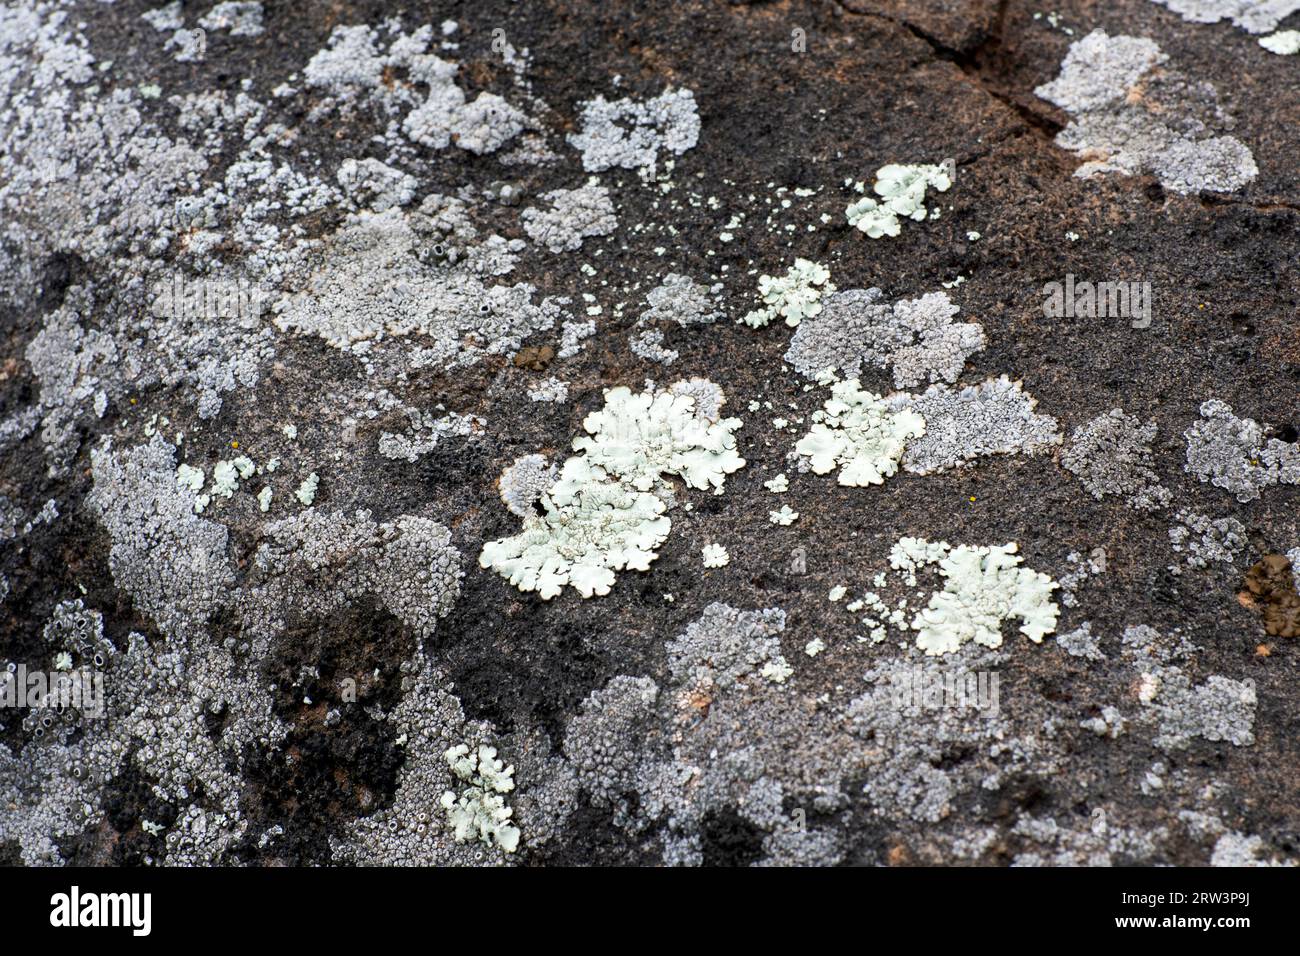 Close up of various lichen growing on stone. Stock Photo